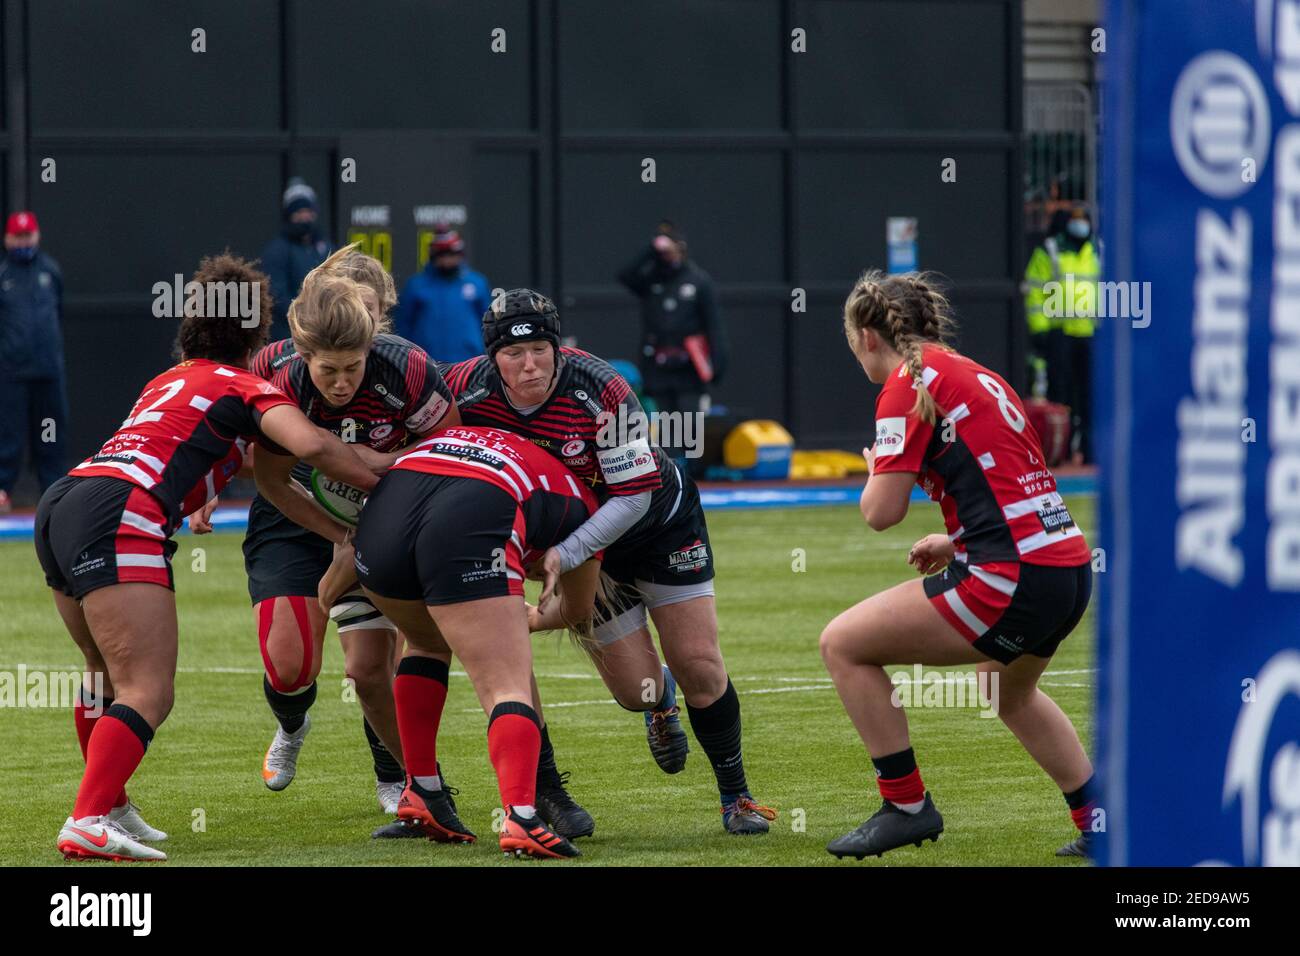 London, UK. 14th Feb, 2021. Sophie De Goede (#4 Saracens Women) attacking during the Allianz Premier 15s game between Saracens Women and Gloucester Hartpury Women at StoneX Stadium in London, England. Credit: SPP Sport Press Photo. /Alamy Live News Stock Photo